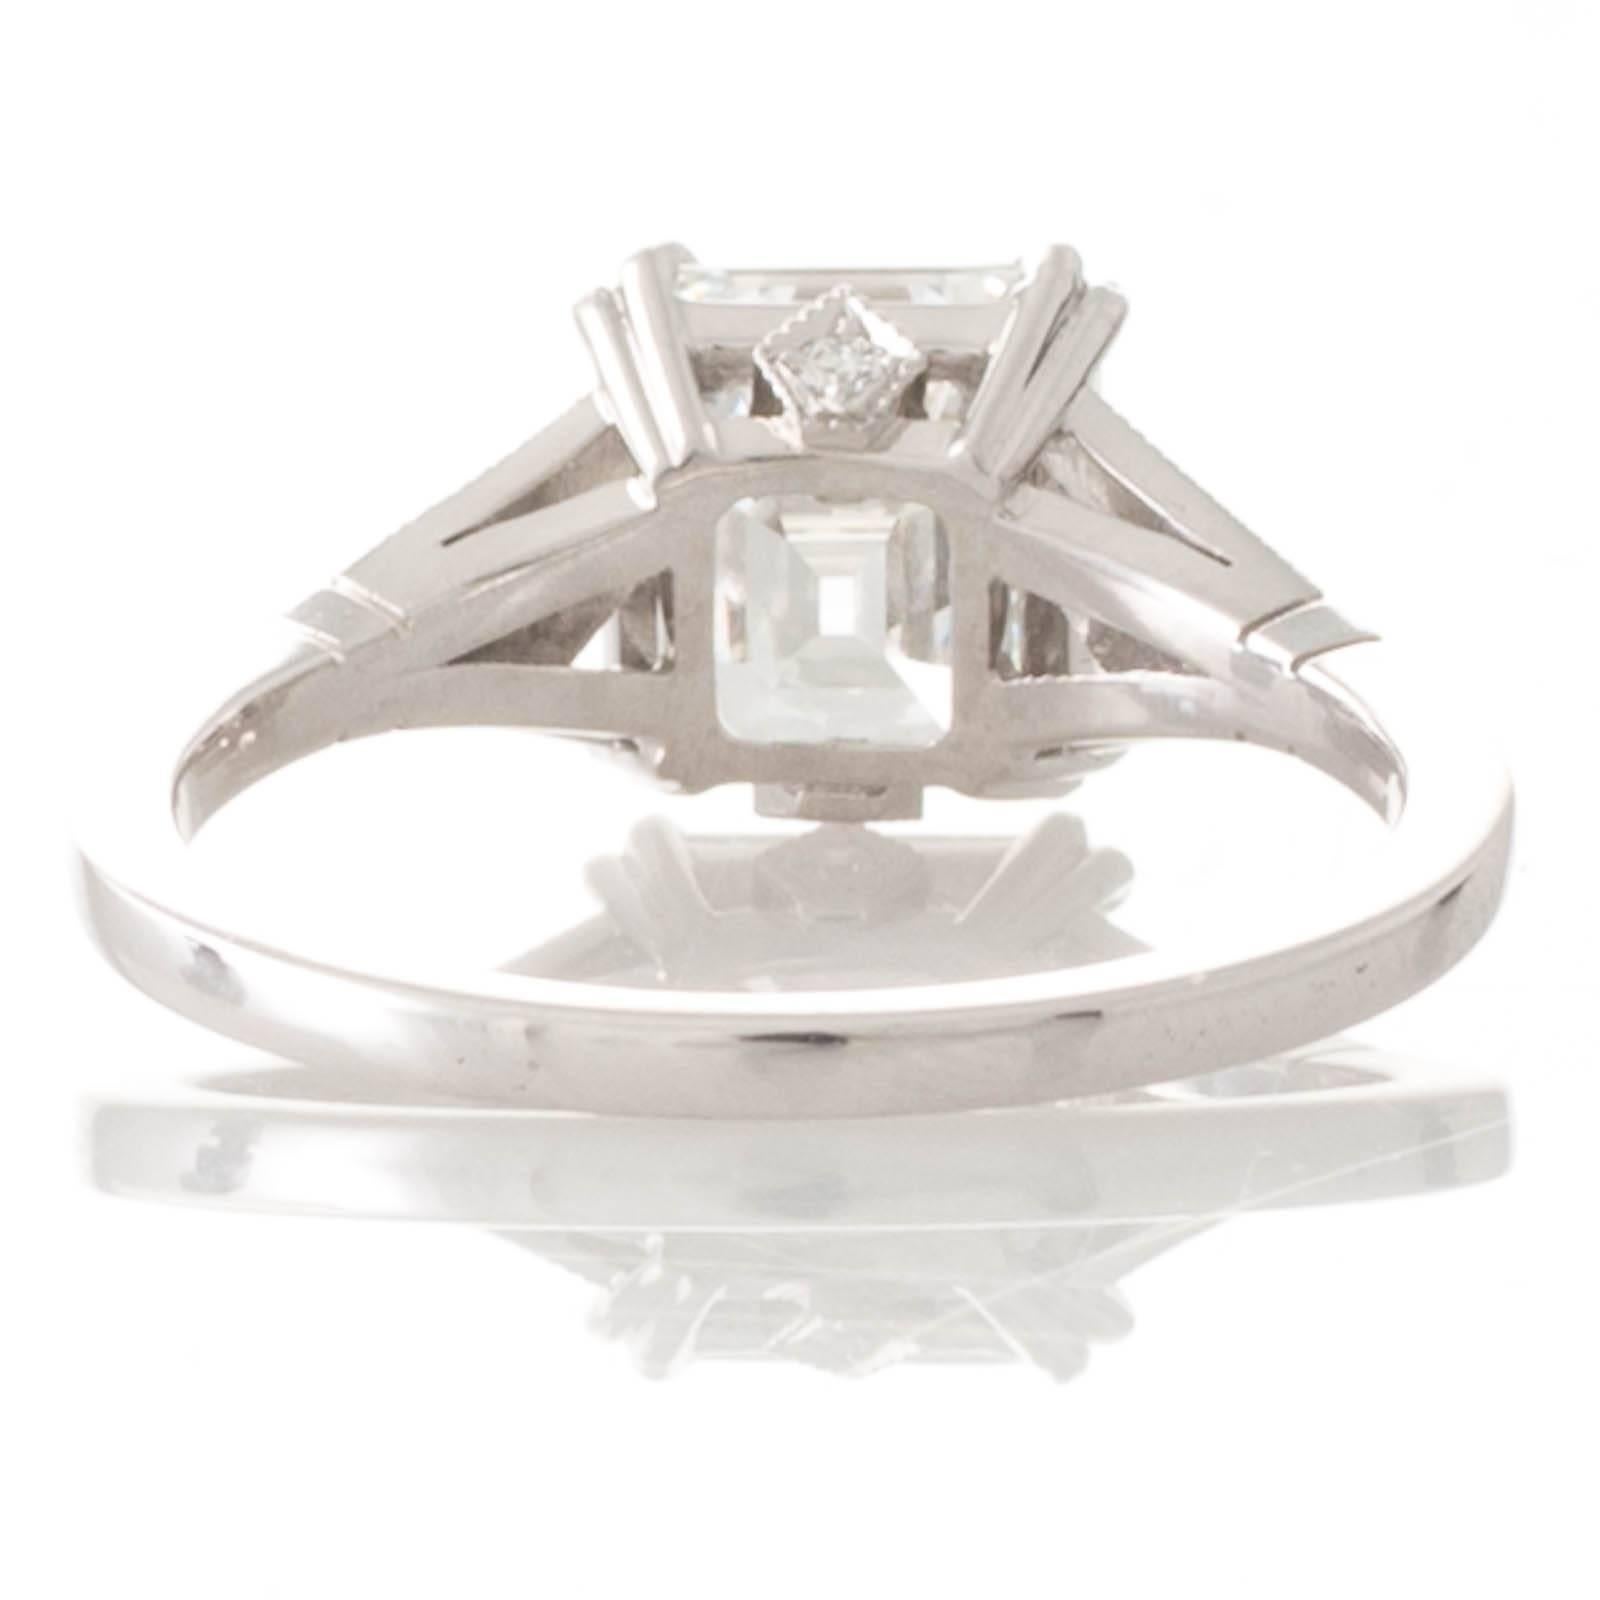 An 18ct white gold Art Deco style ring featuring an impressive 2.23ct Asscher cut diamond accompanied by a GIA certificate stating colour as G clarity VS1 set in four double claws to a railed gallery with pierced detailing grain set with a round